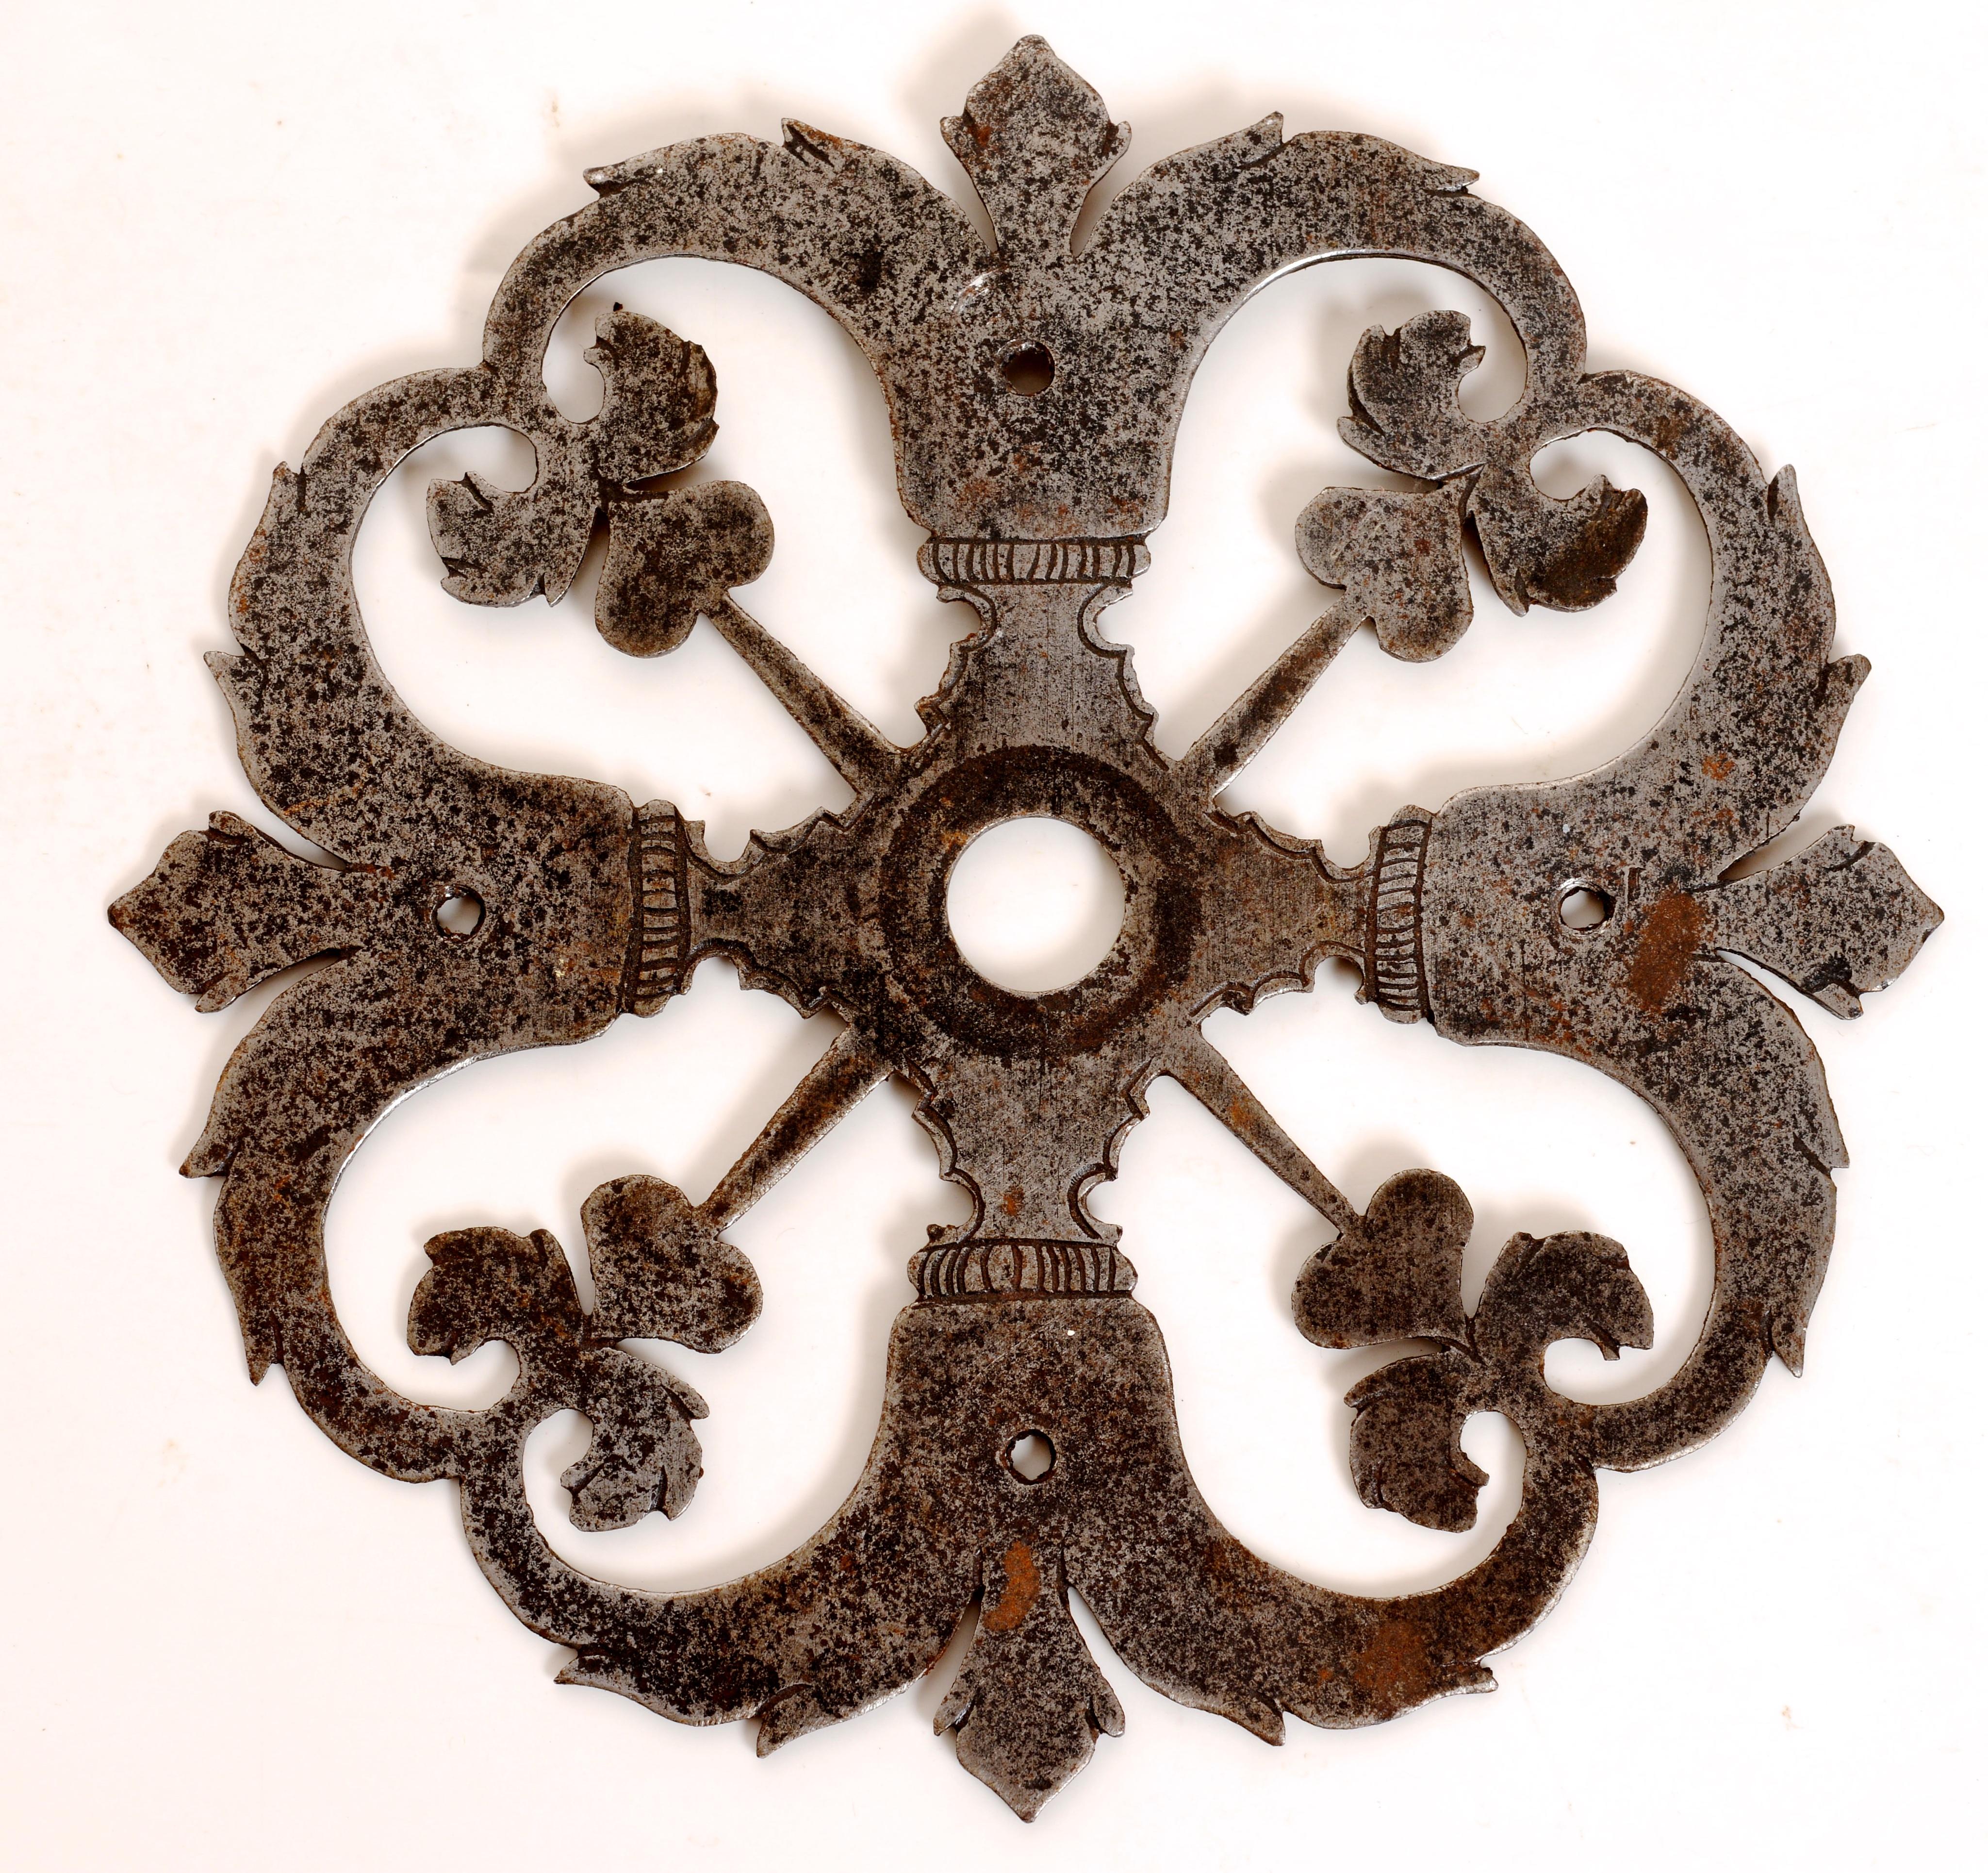 French 18th c Door Knocker with Original Cast Iron Knocker and Wrought Iron Back. This hand-wrought iron door knocker with a pierced scrolling back plate in Fleur-de-lis, floral and c-scroll patterns with hand etched decoration. The back plate is